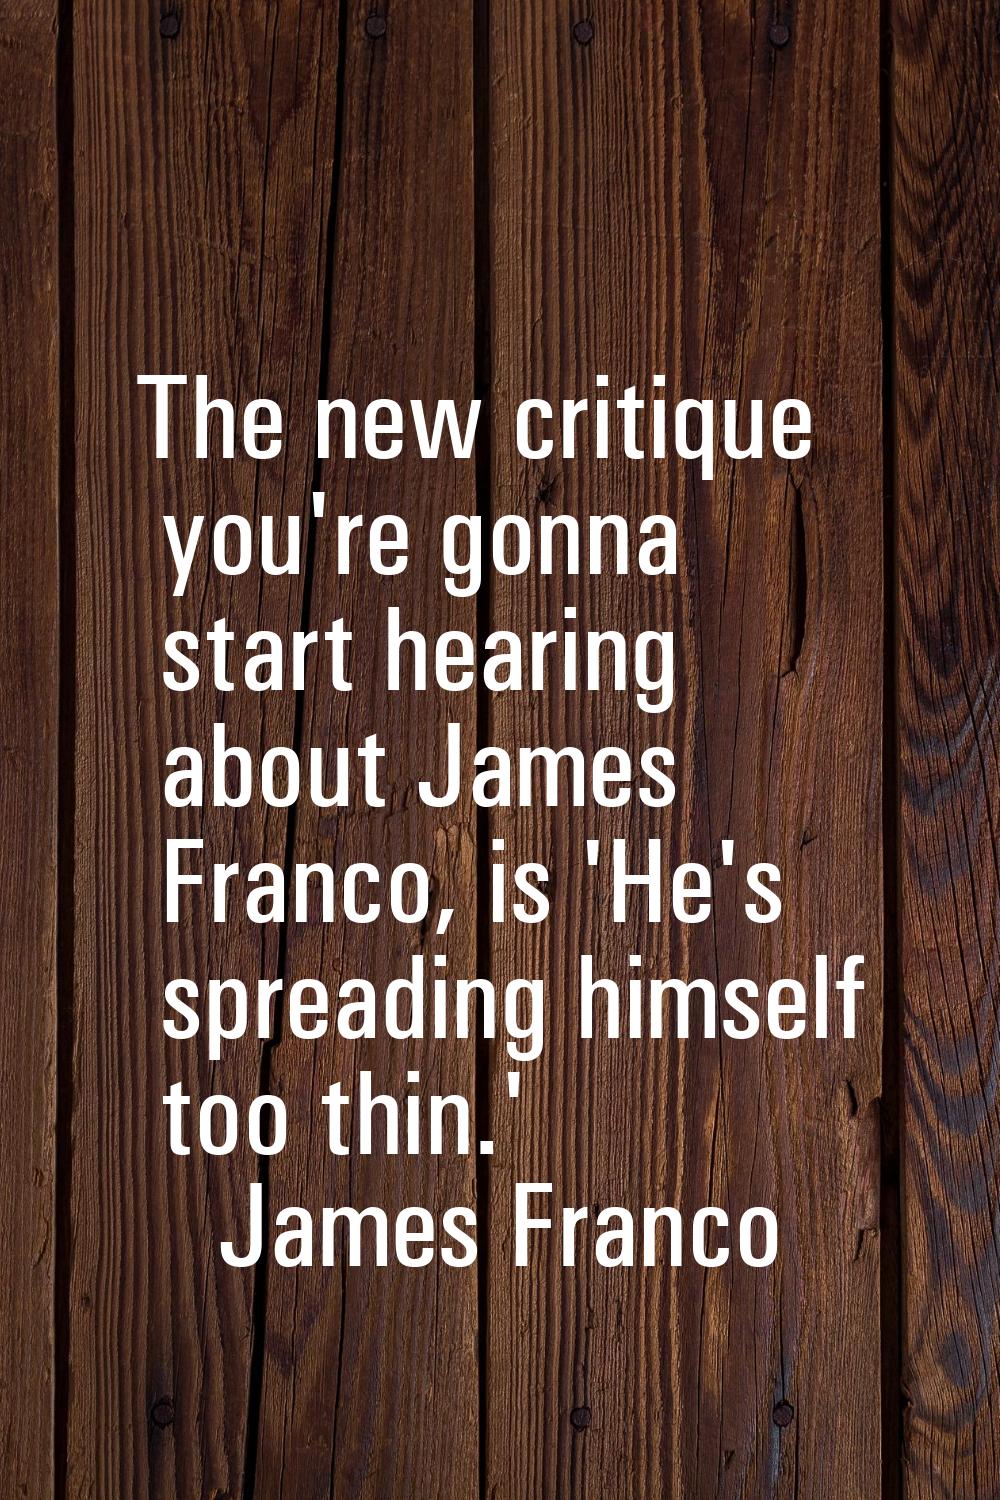 The new critique you're gonna start hearing about James Franco, is 'He's spreading himself too thin